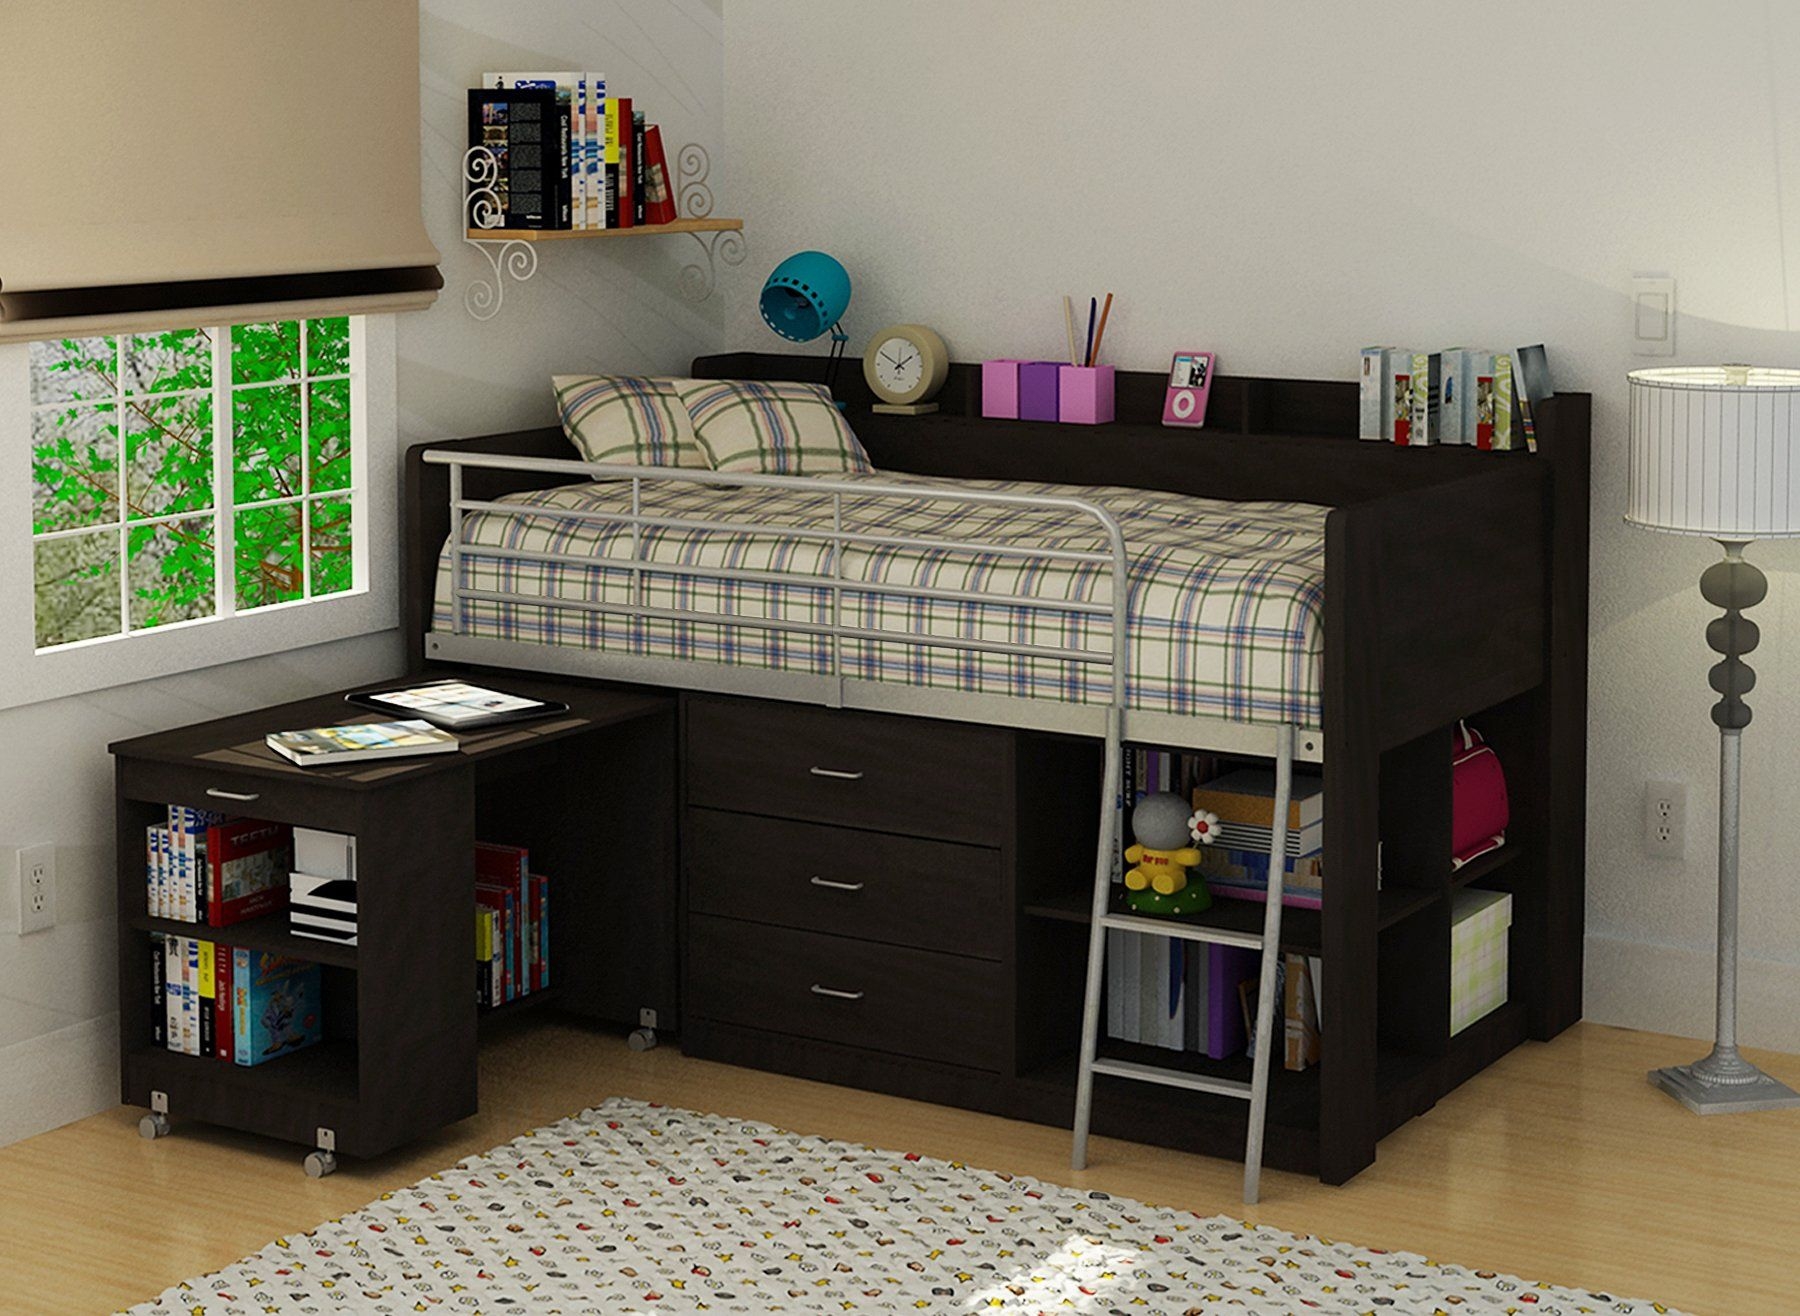 Bed with study table design